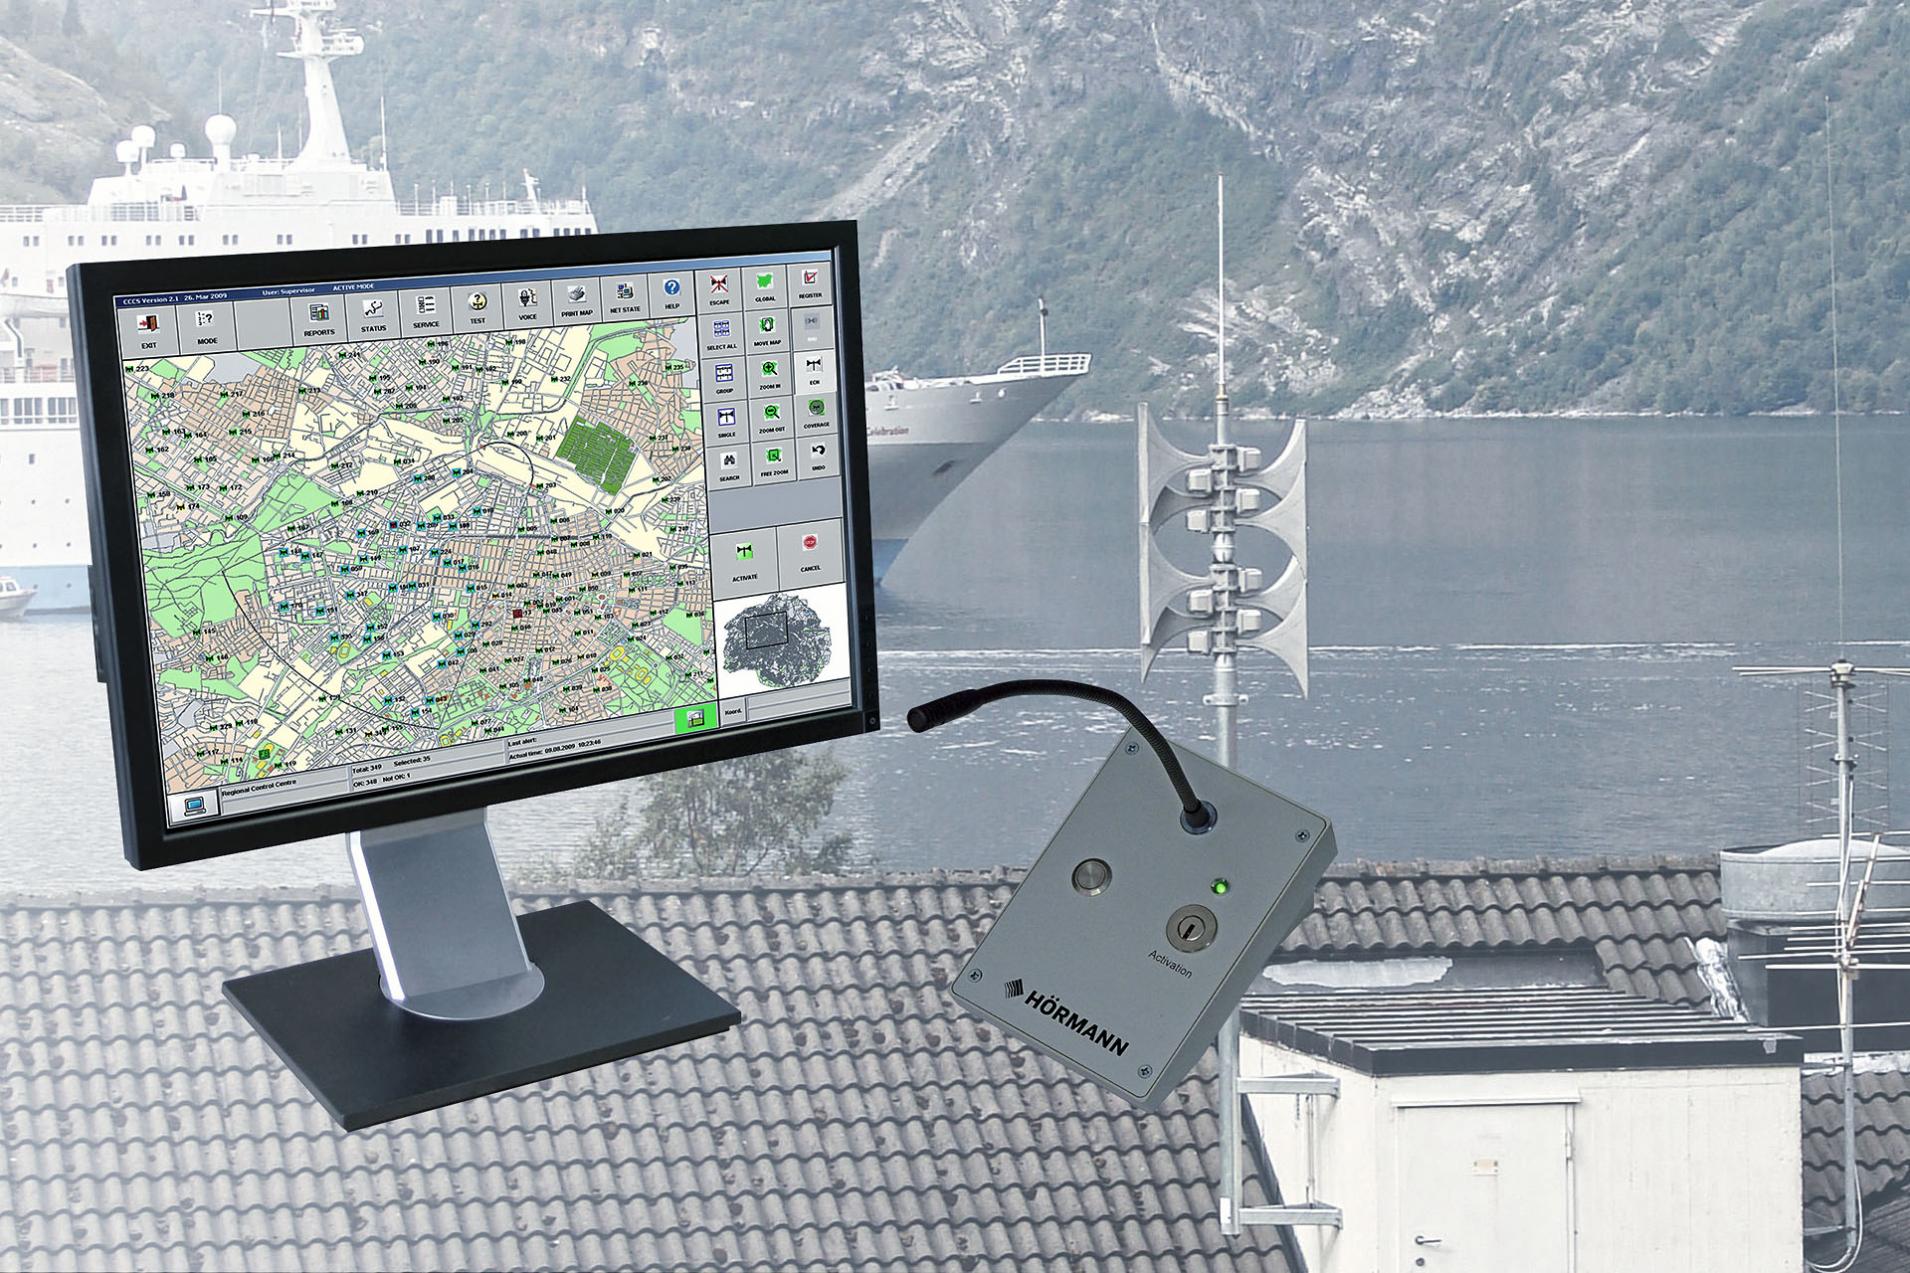 CCCS control and monitoring software for large siren networks